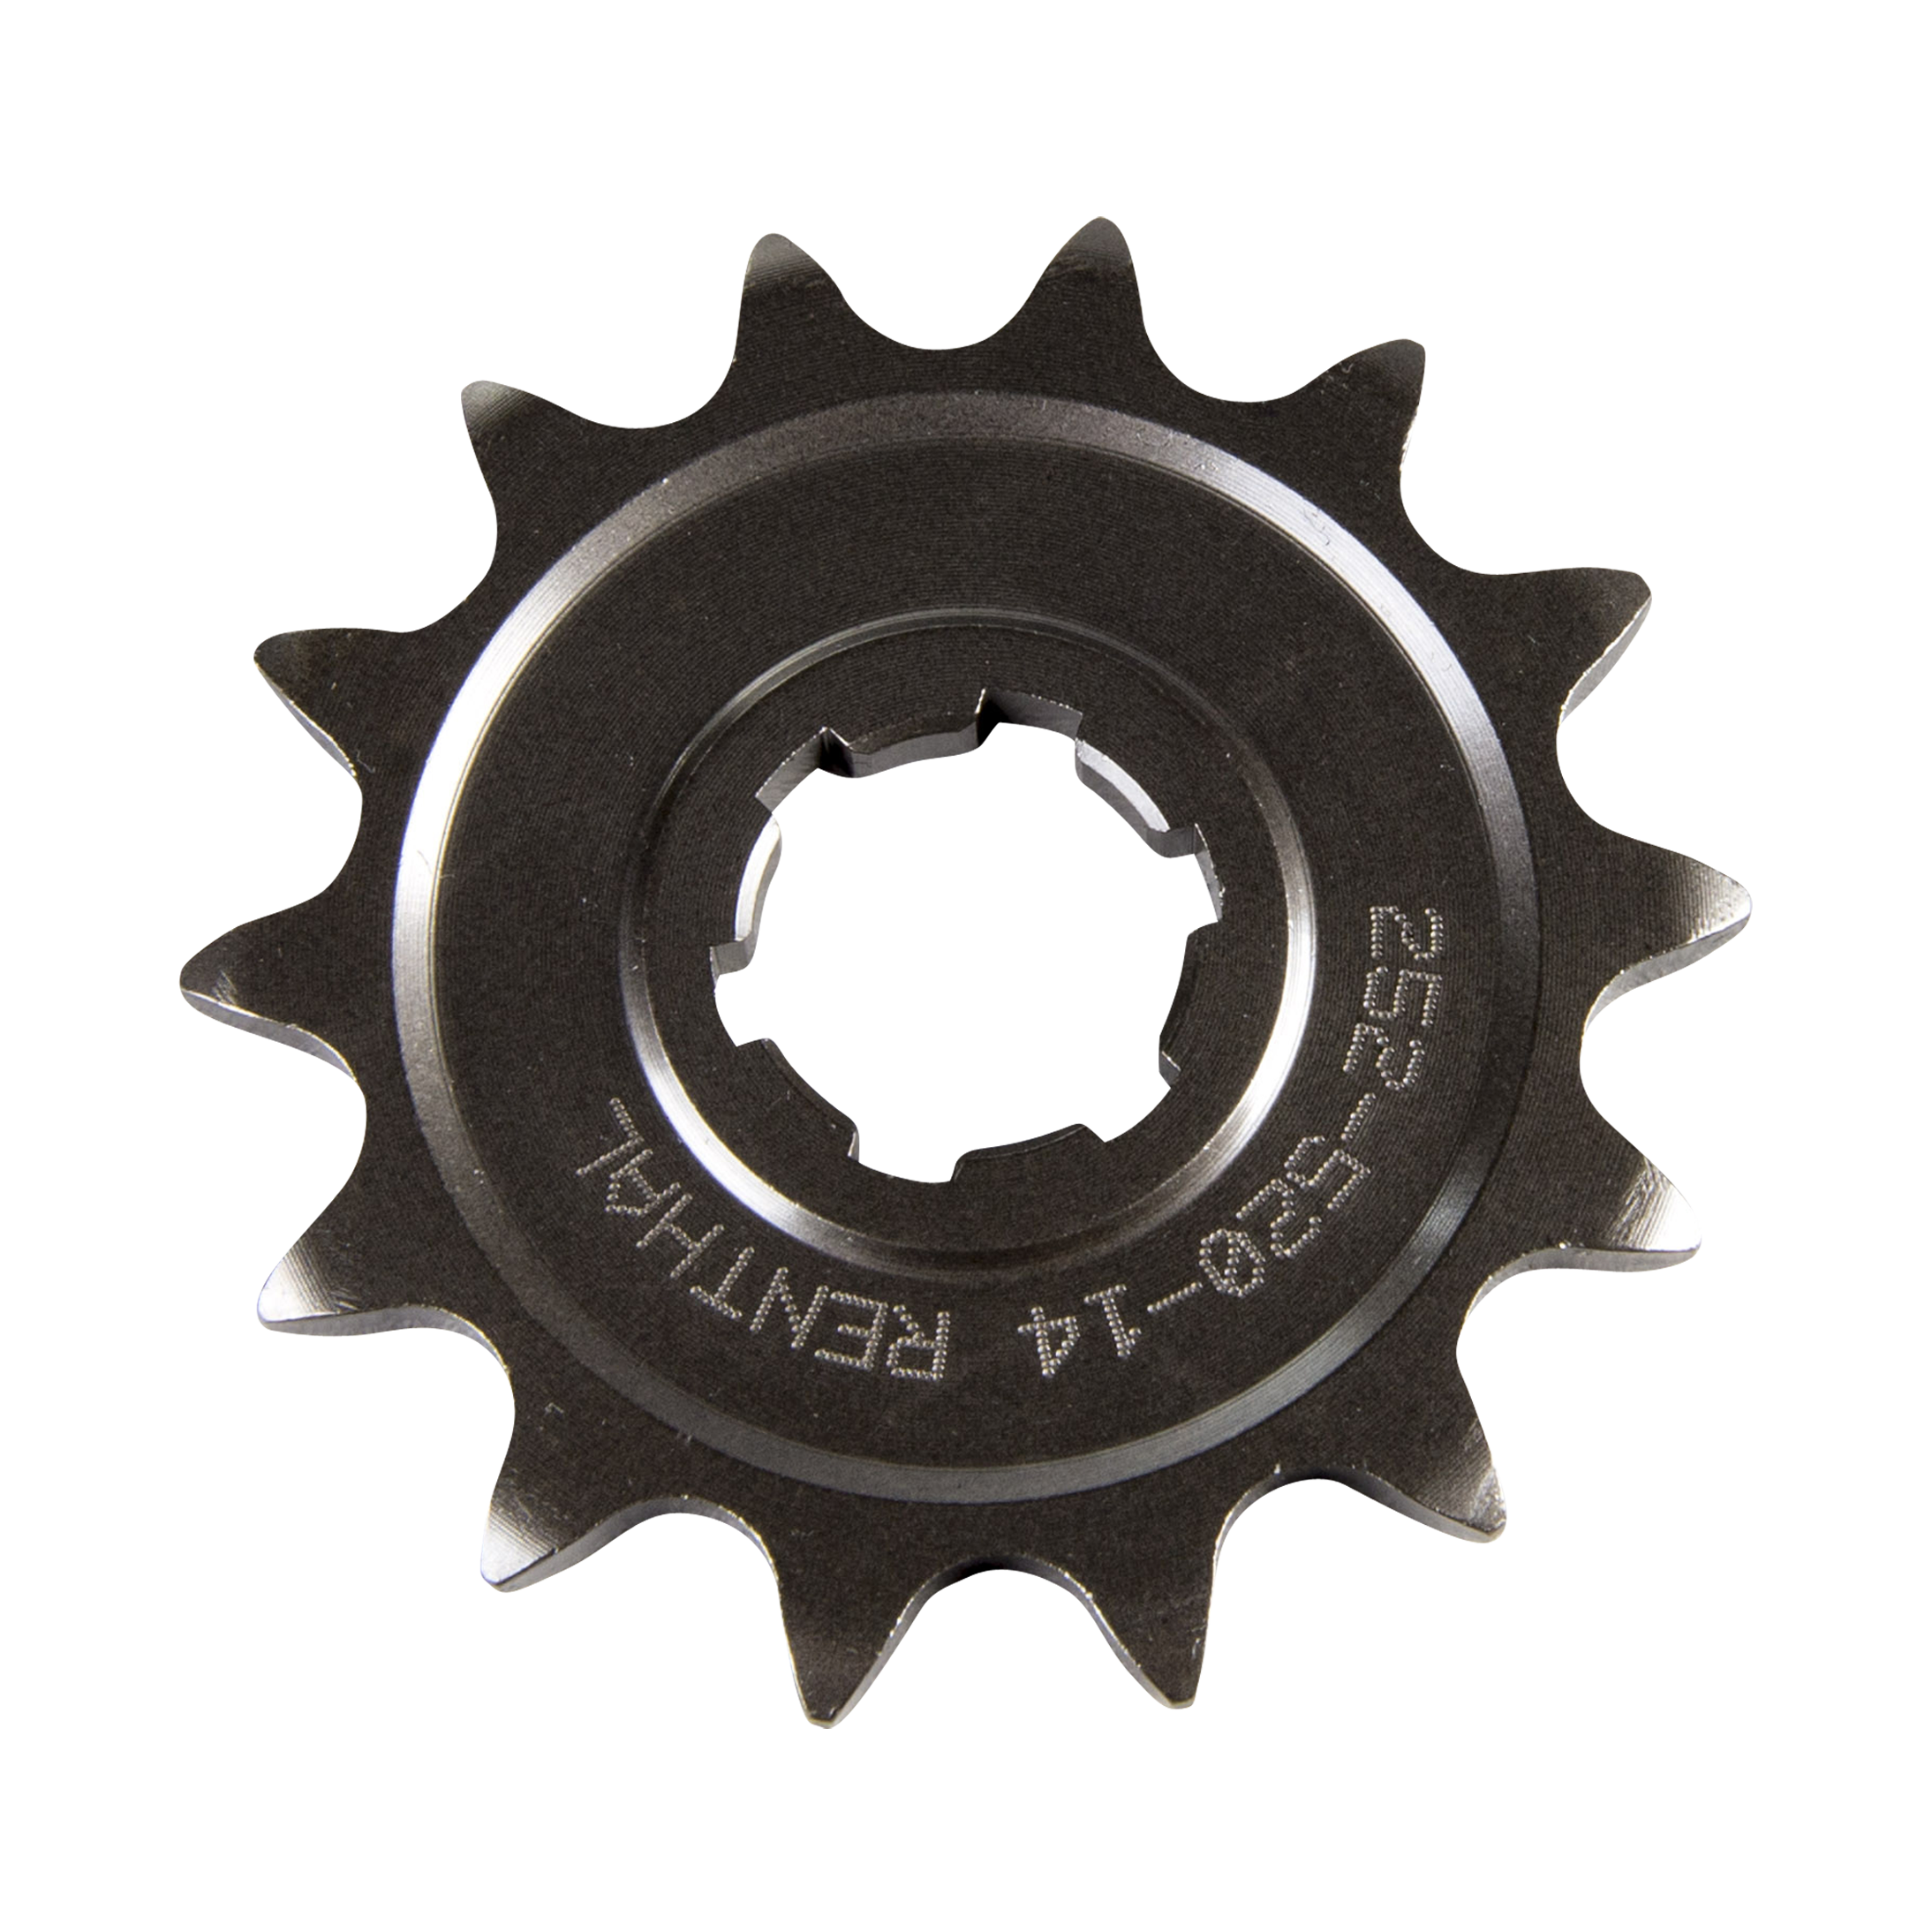 bicycle front sprocket